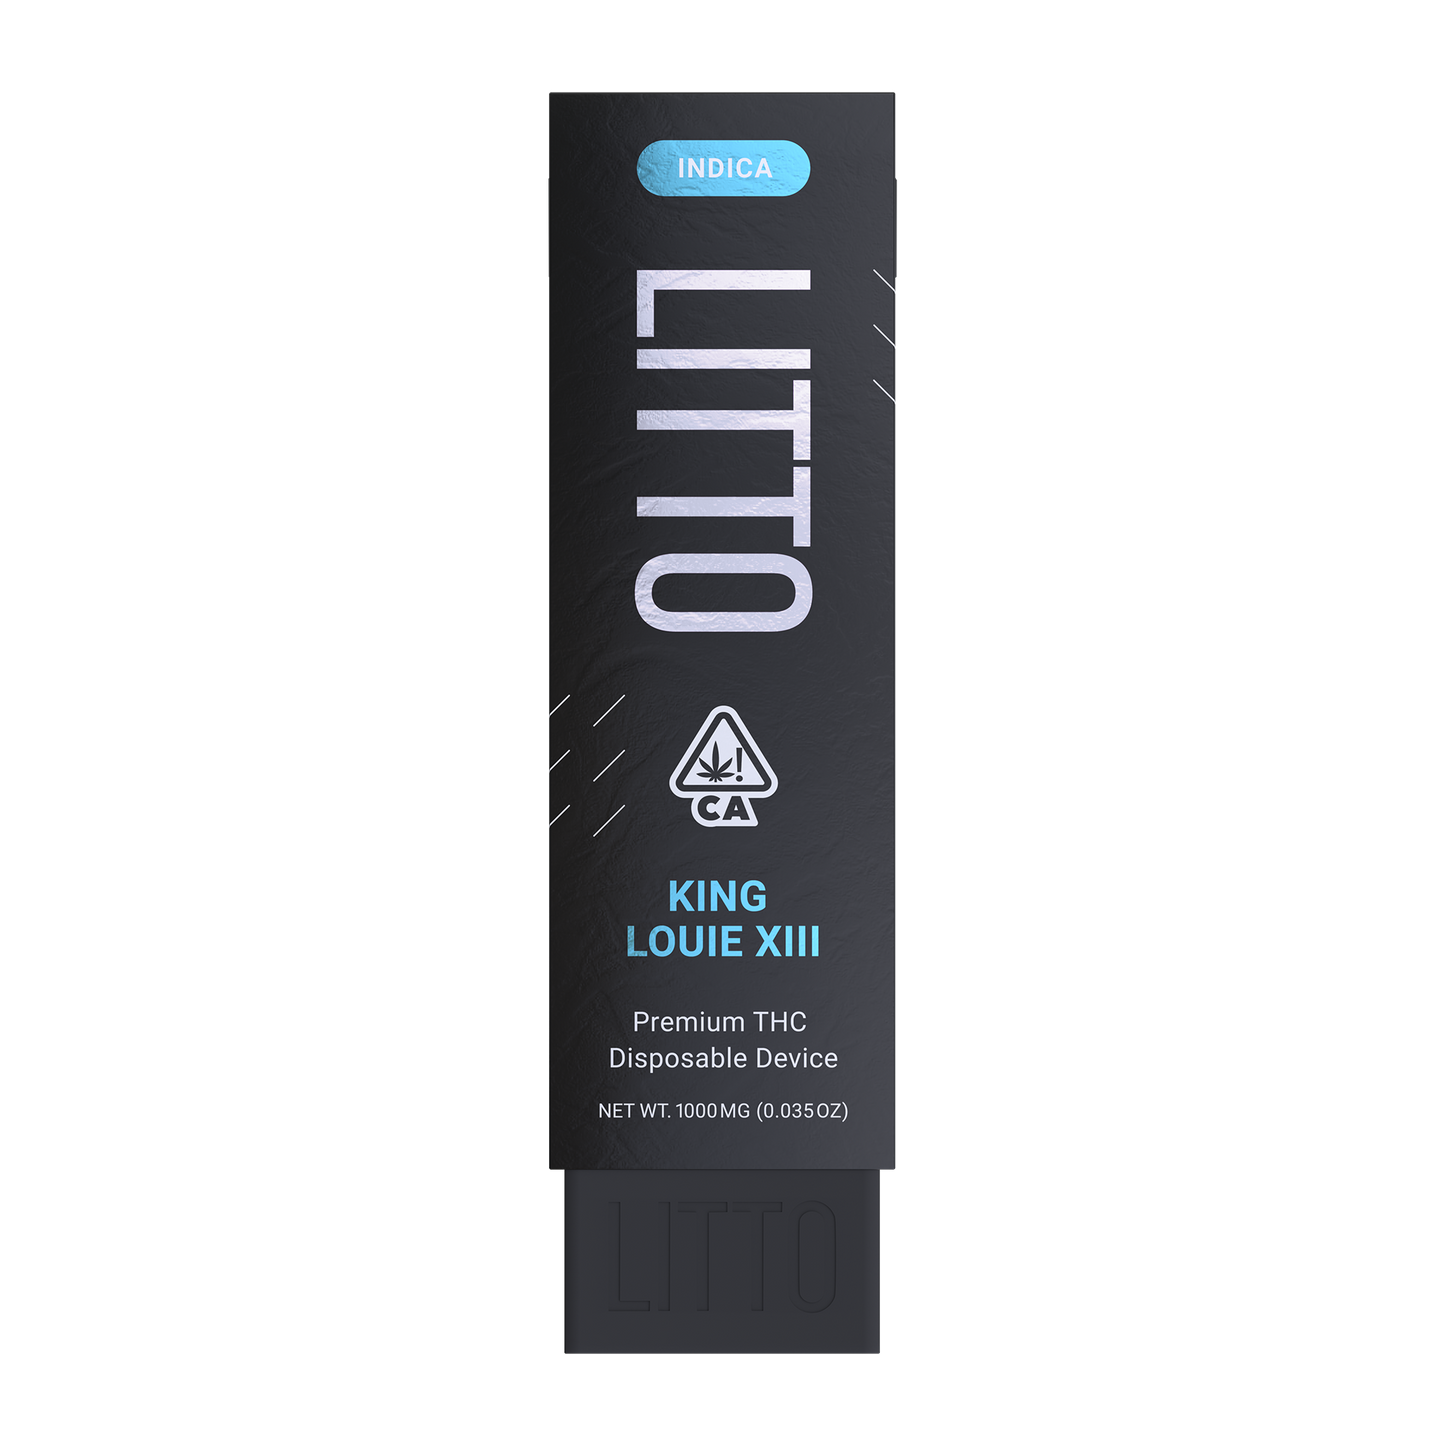 Litto Disposable Vape Pen - Indica 1000mg - King Louie XIII